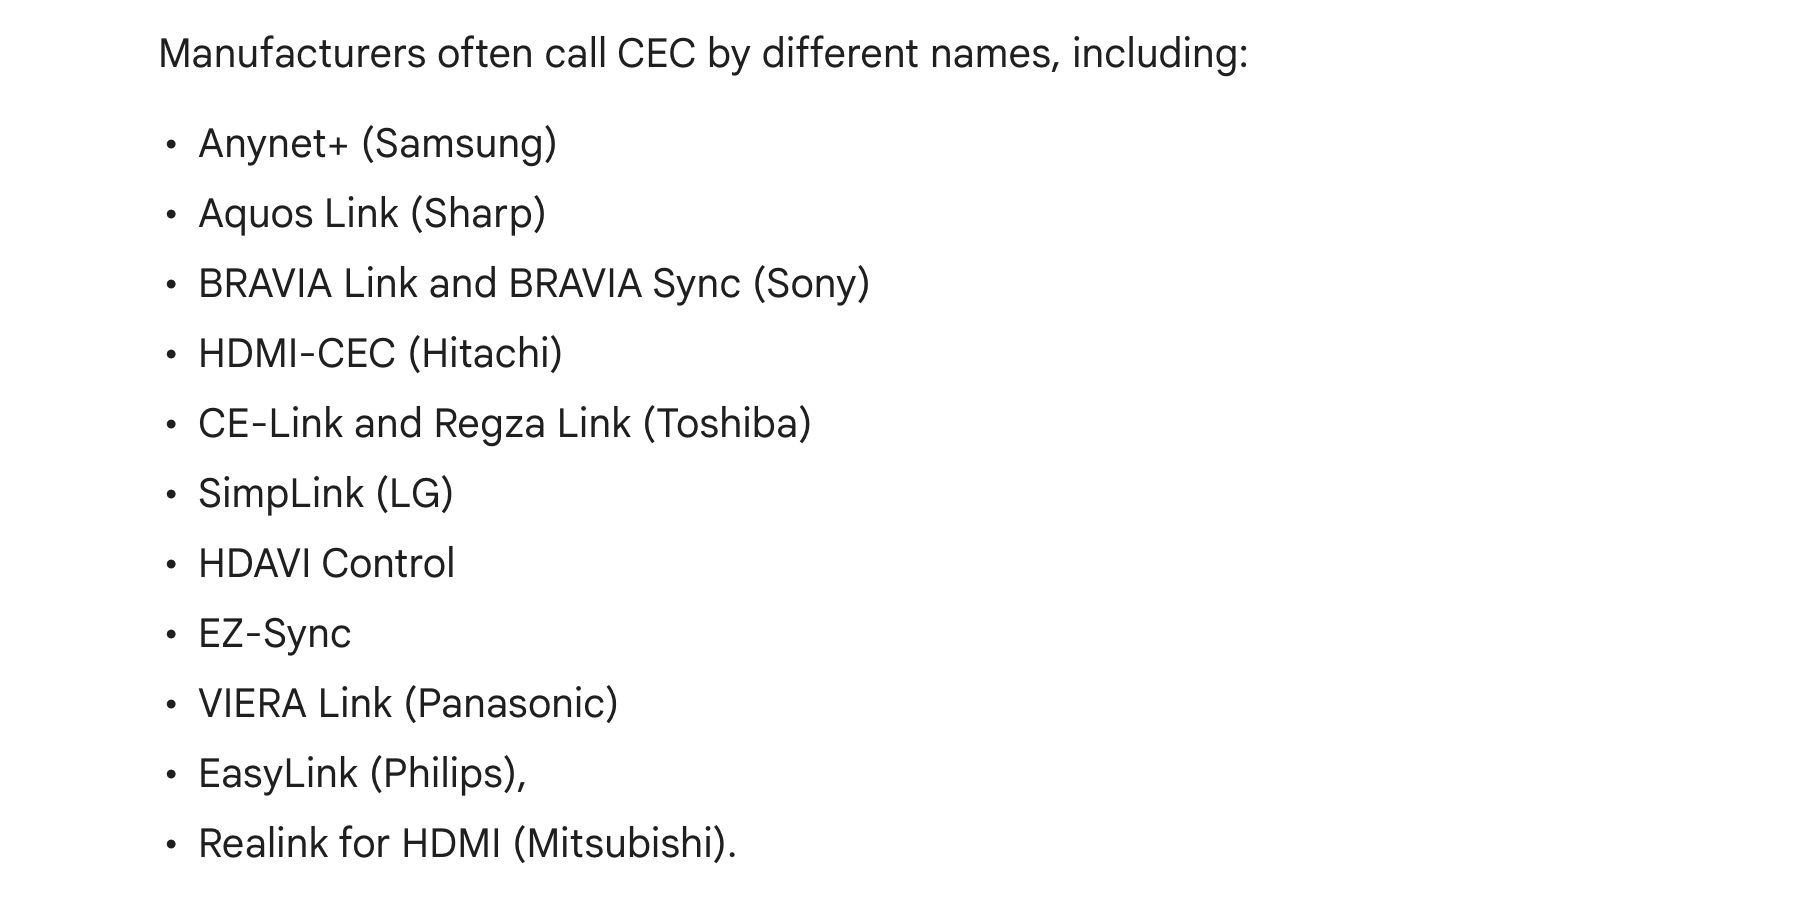 Google's list of various brand names for HDMI-CEC.